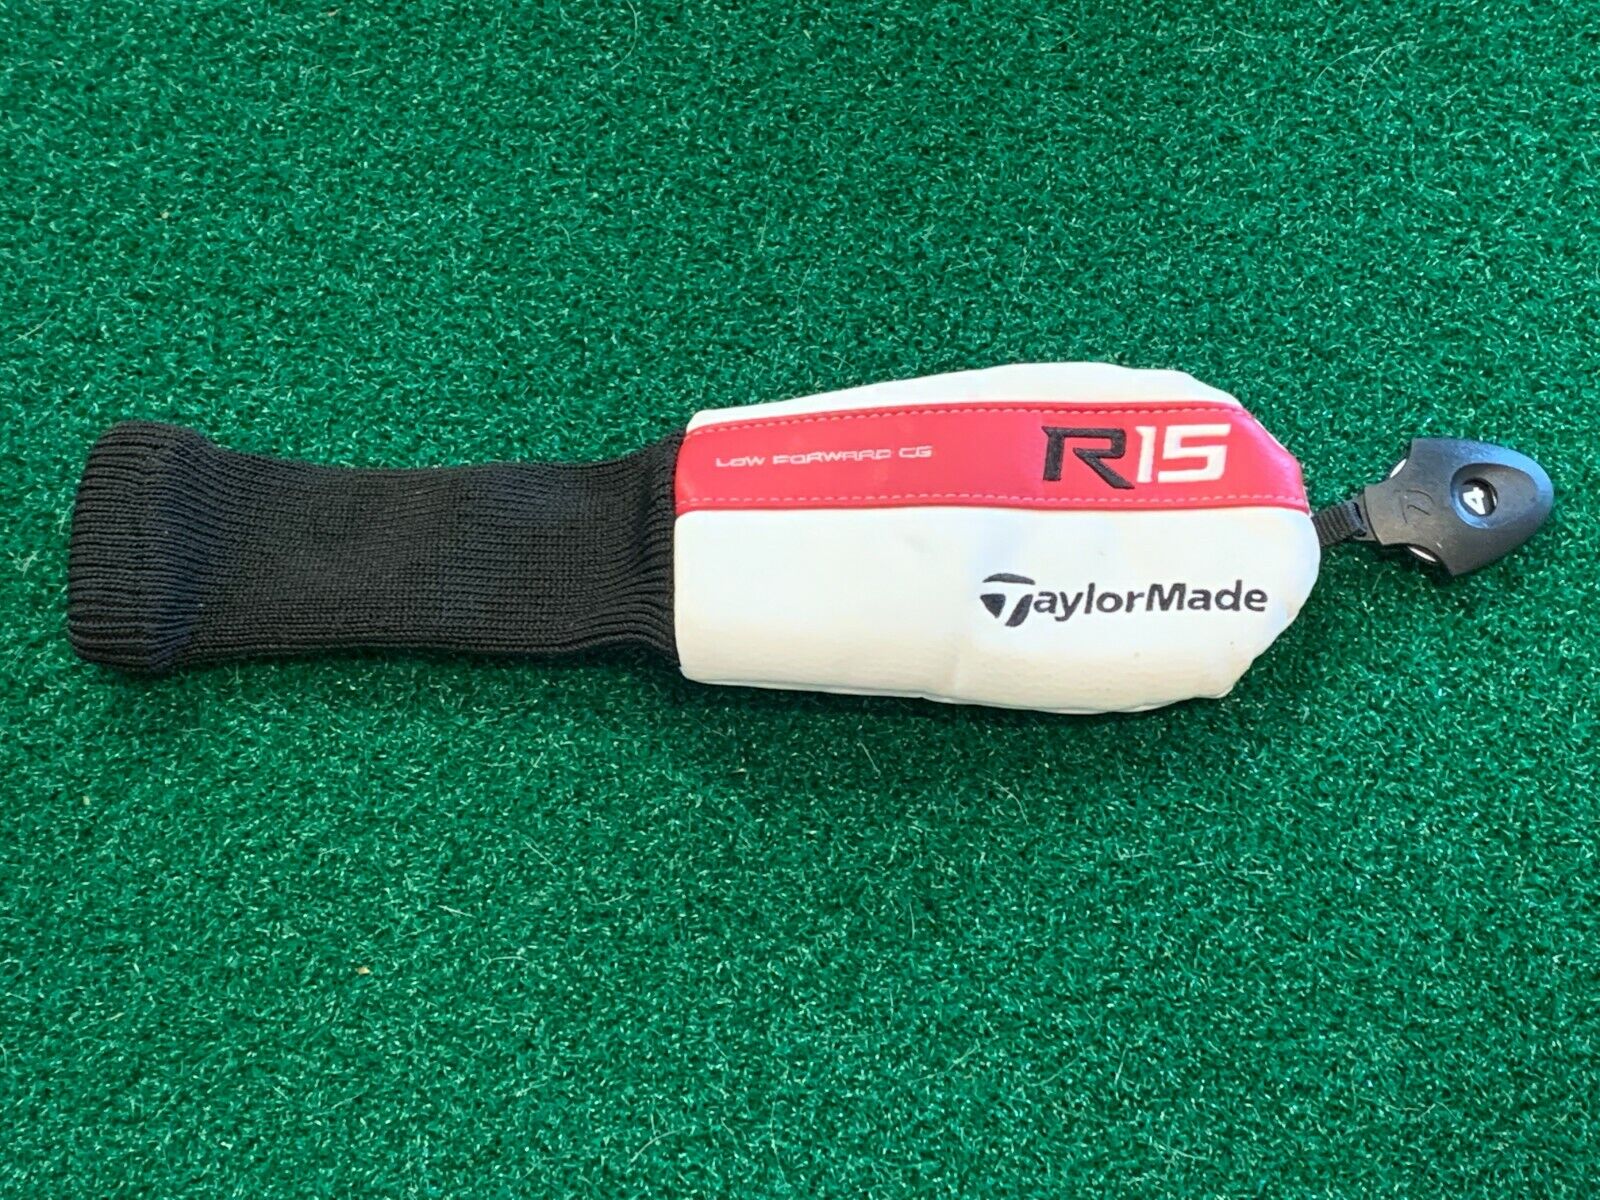 TAYLORMADE R15 HYBRID RESCUE HEADCOVER - White Red Head Cover w Tag